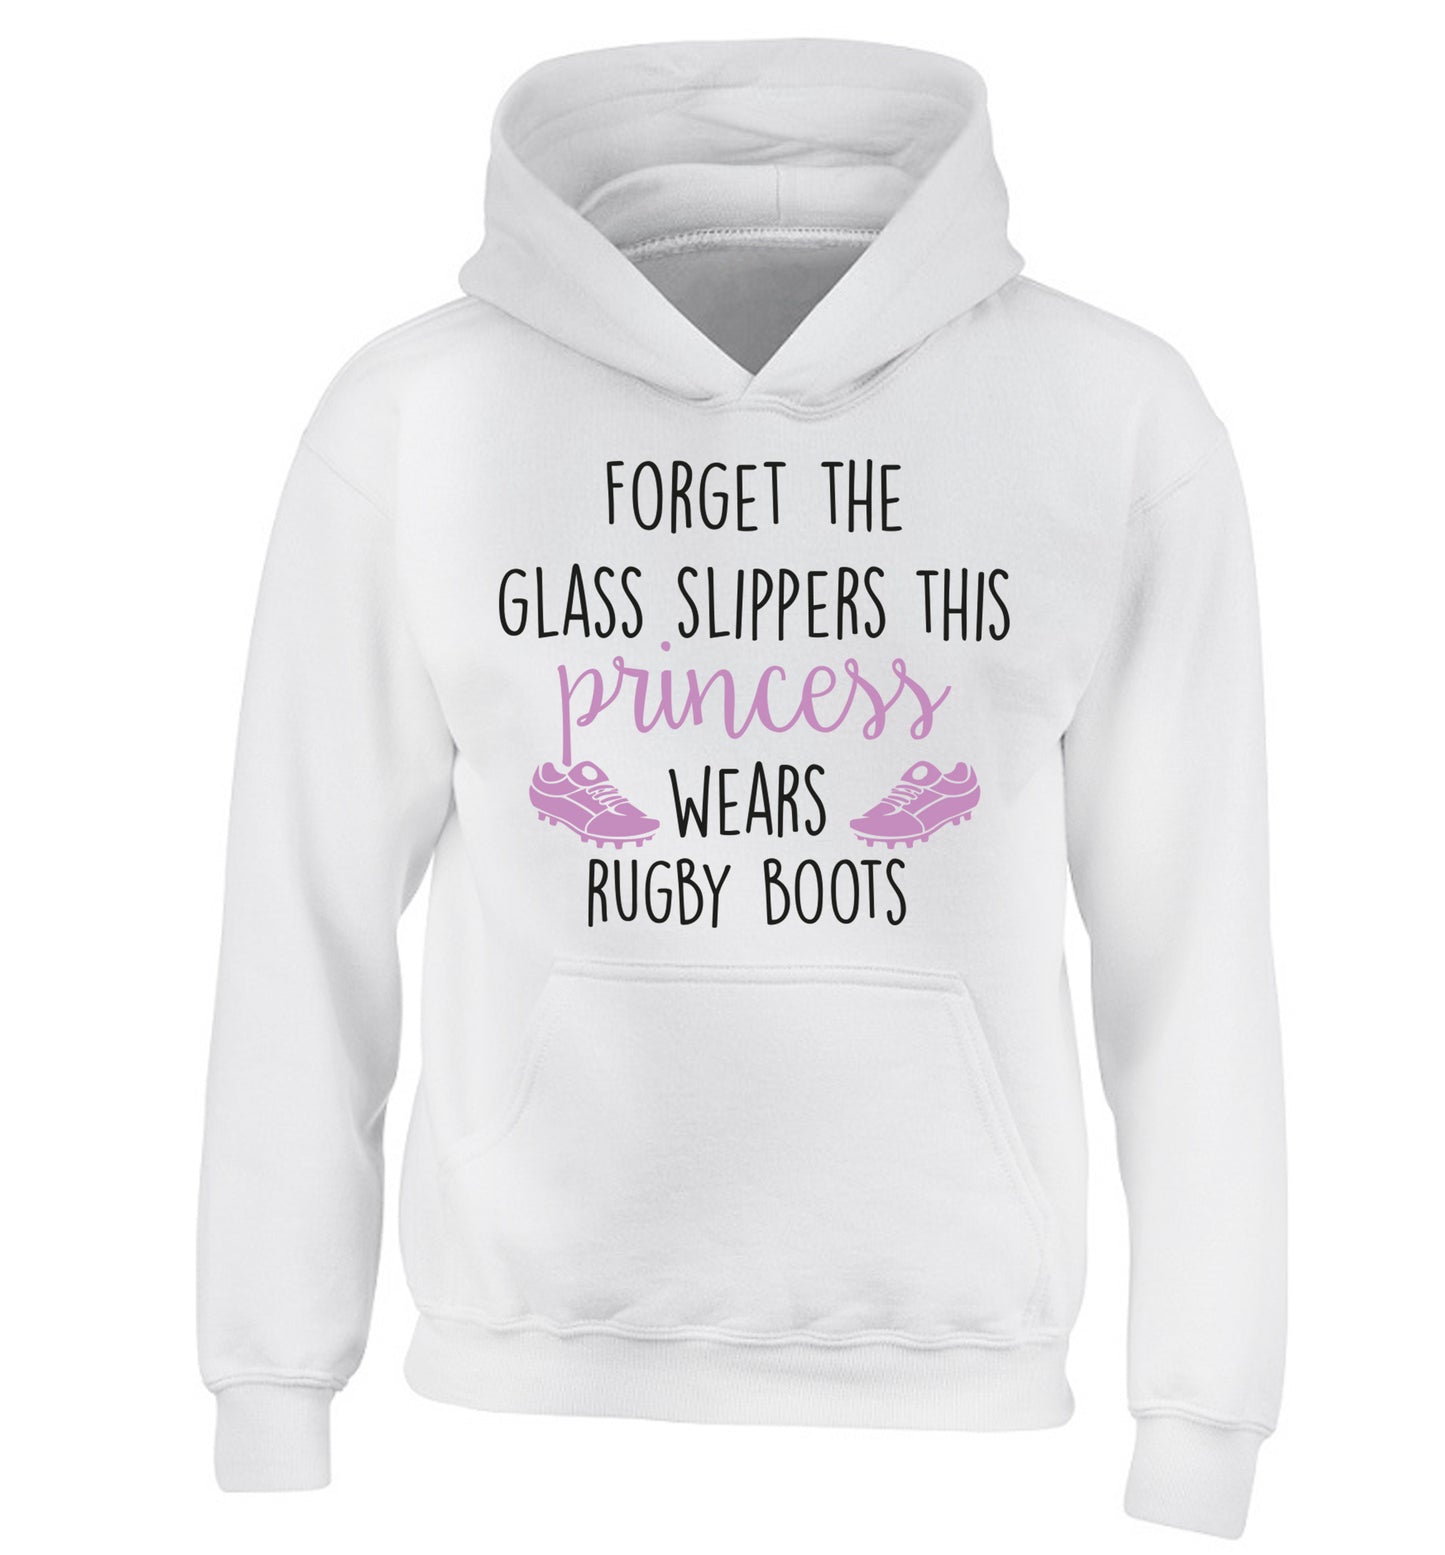 Forget the glass slippers this princess wears rugby boots children's white hoodie 12-14 Years